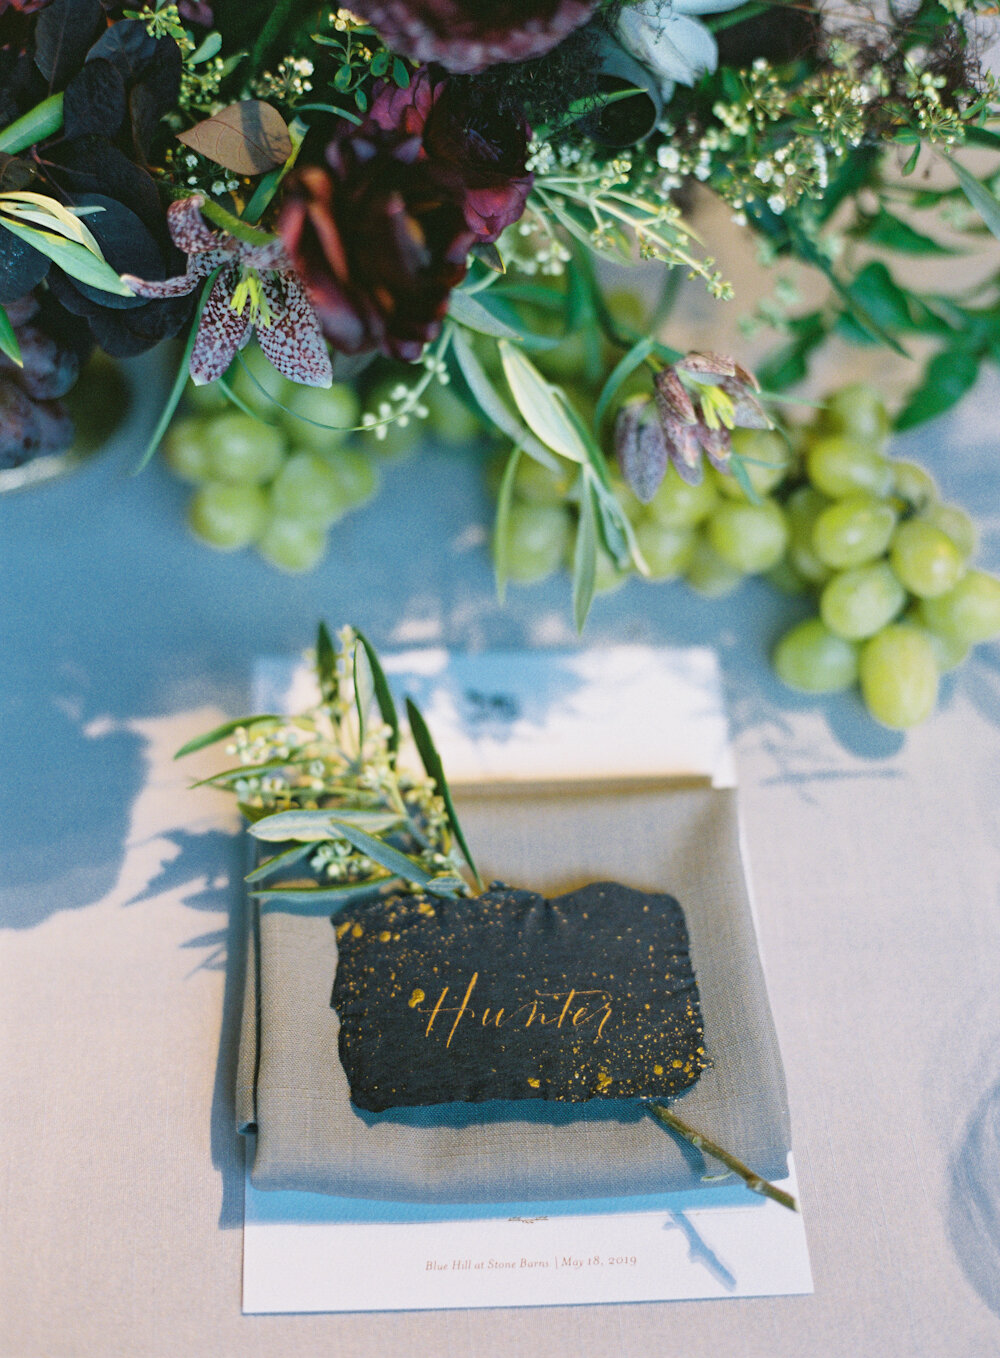 Blue Hill at Stone Barns wedding place card with hand calligraphy and hand torn edges